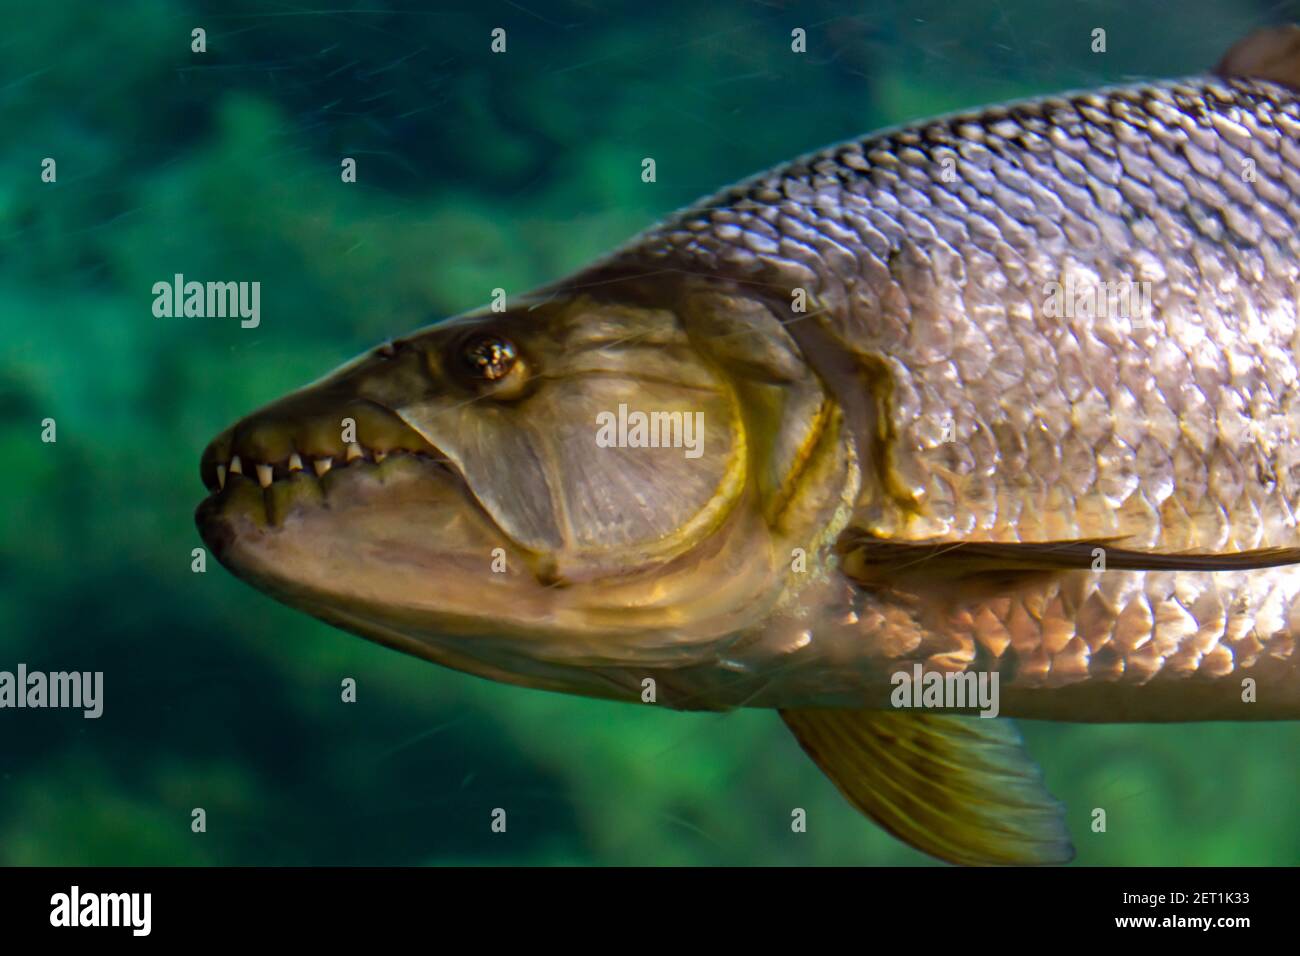 Hydrocynus vittatus, the African tigerfish, tiervis or ngwesh closeup photo showing its large sharp teeth while swimming on a aquarium somewhere in as Stock Photo